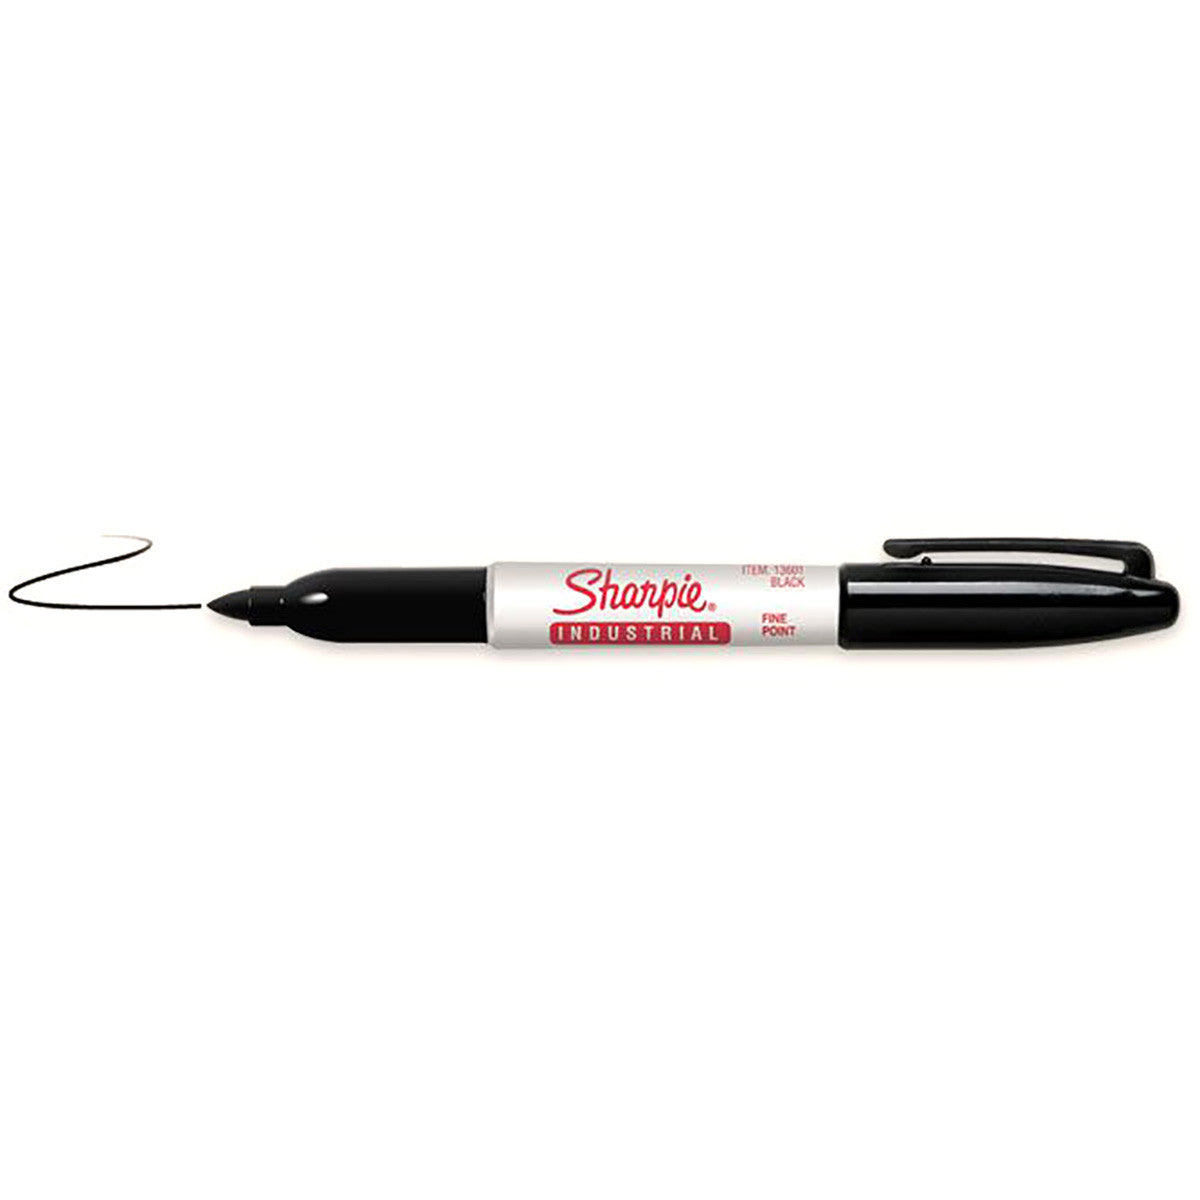 Sharpie Industrial Permanent Marker Black Fine, Sold Individually  Sharpie Markers